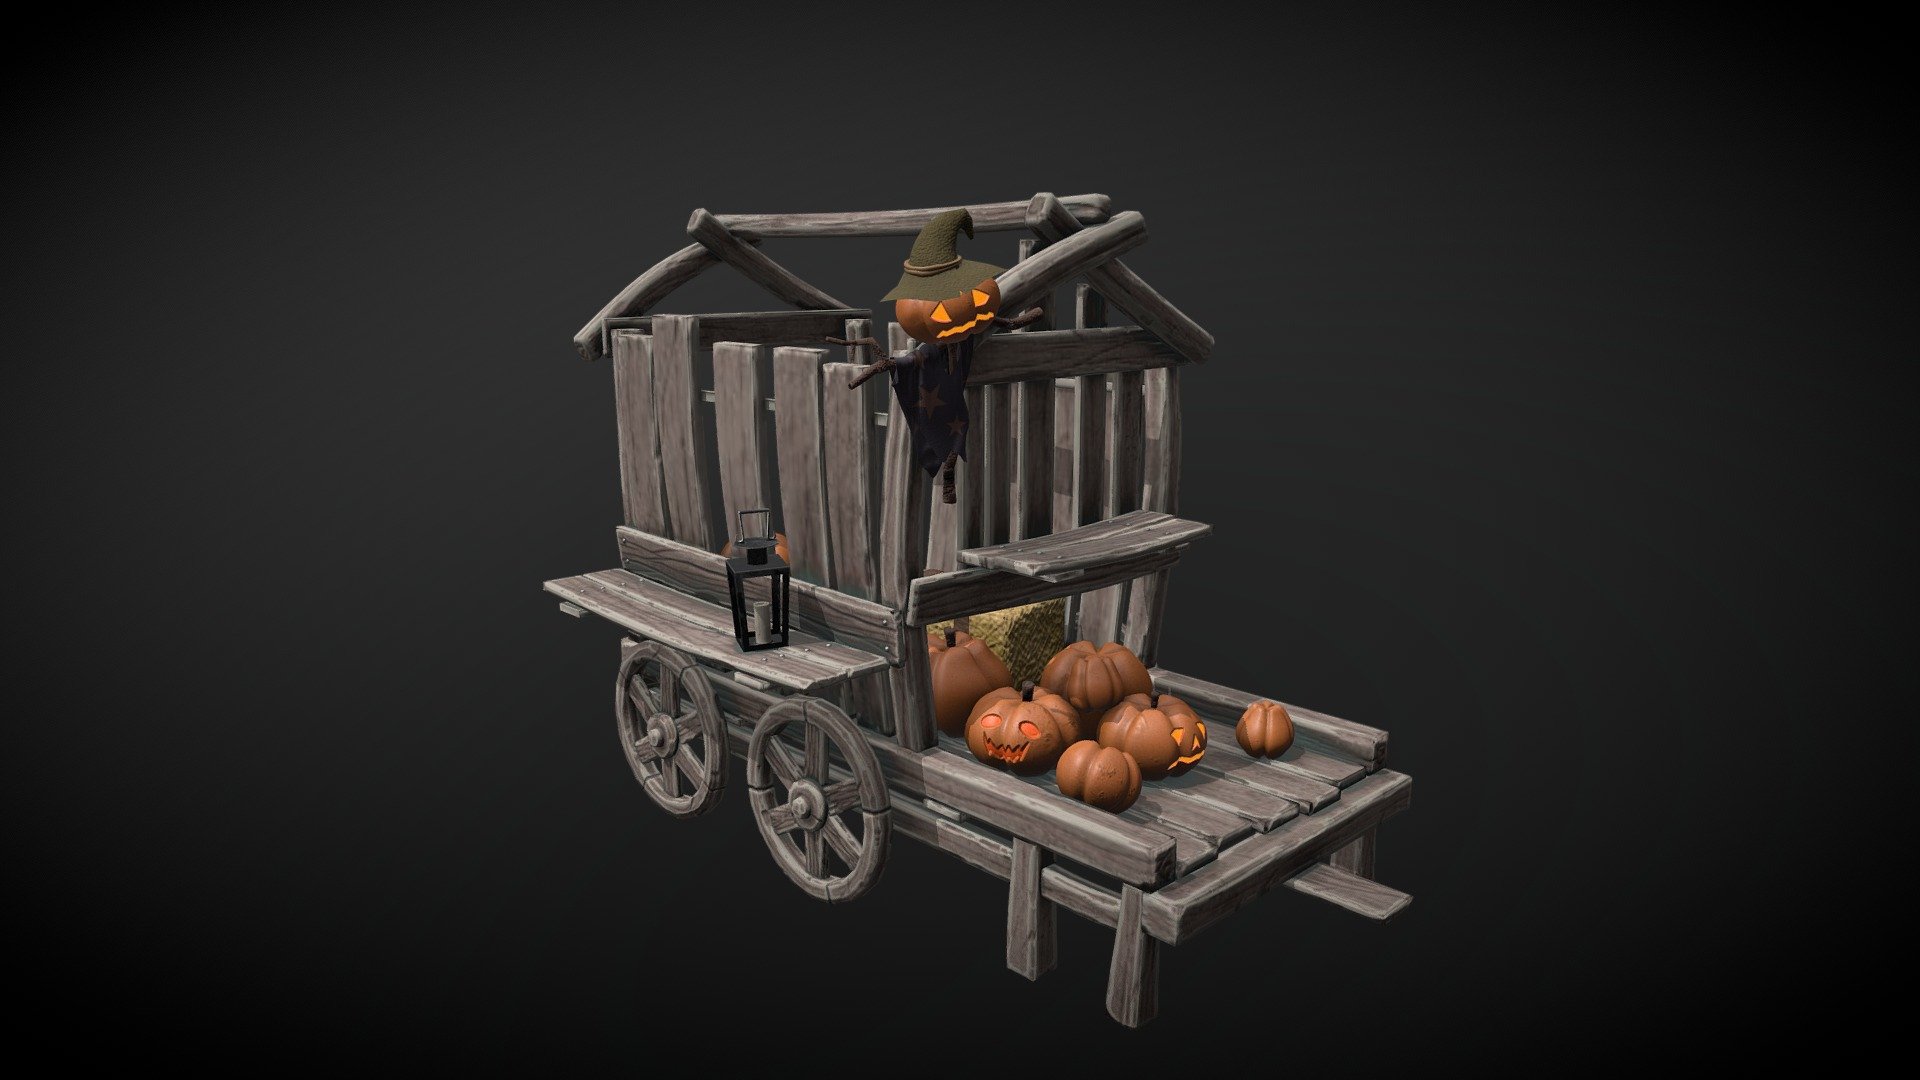 This piece is of a haunted wagon concept I tweaked to be more light-hearted and to be able to play with different methods of coloring in Substaance Painter. I started in Maya by modeling and UV each individual piece. I then transferred the low poly model into Zbrush to sculpt in the wood grain textures and other small details. I then ported both the low and high poly meshes into Substance Painter, baked, and colored. I created my own alphas for the pumpkin faces within Photoshop and brought them over to Substance Painter. I hope you all enjoy! - Spooky Hayride - 3D model by krkosik 3d model